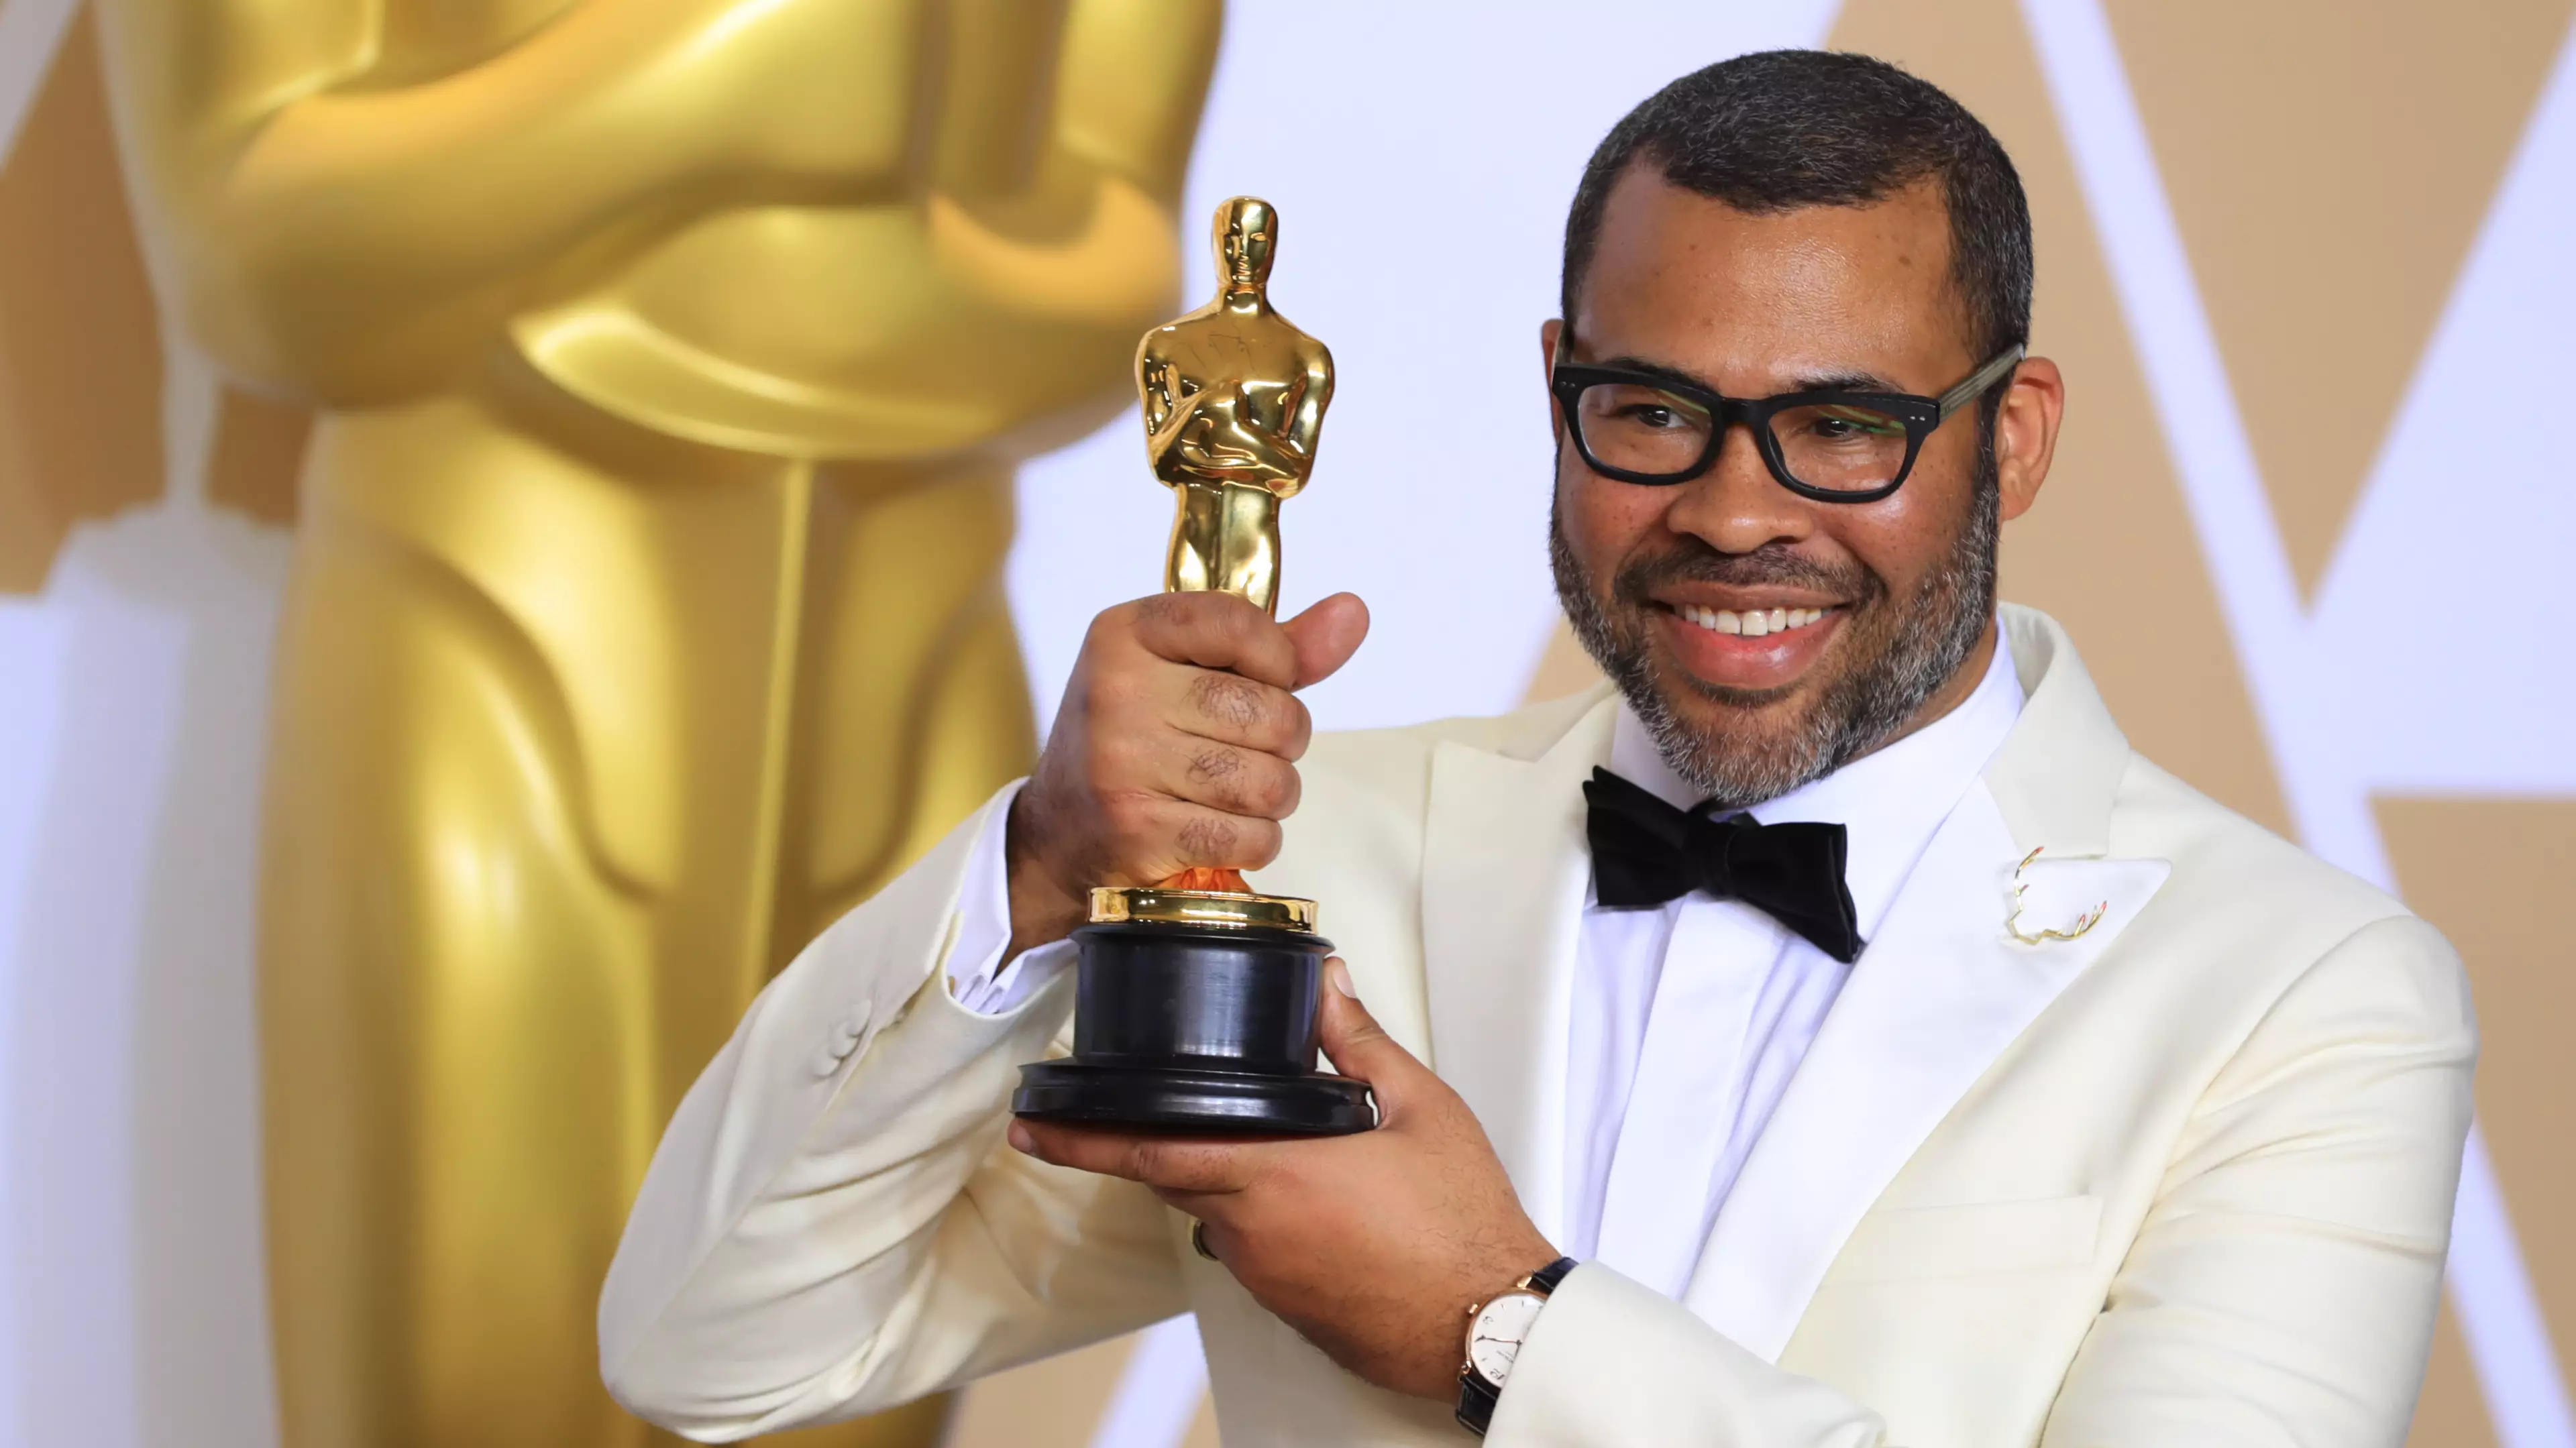 Jordan Peele Announces His First Film Since 'Get Out' And It's Called 'Us'